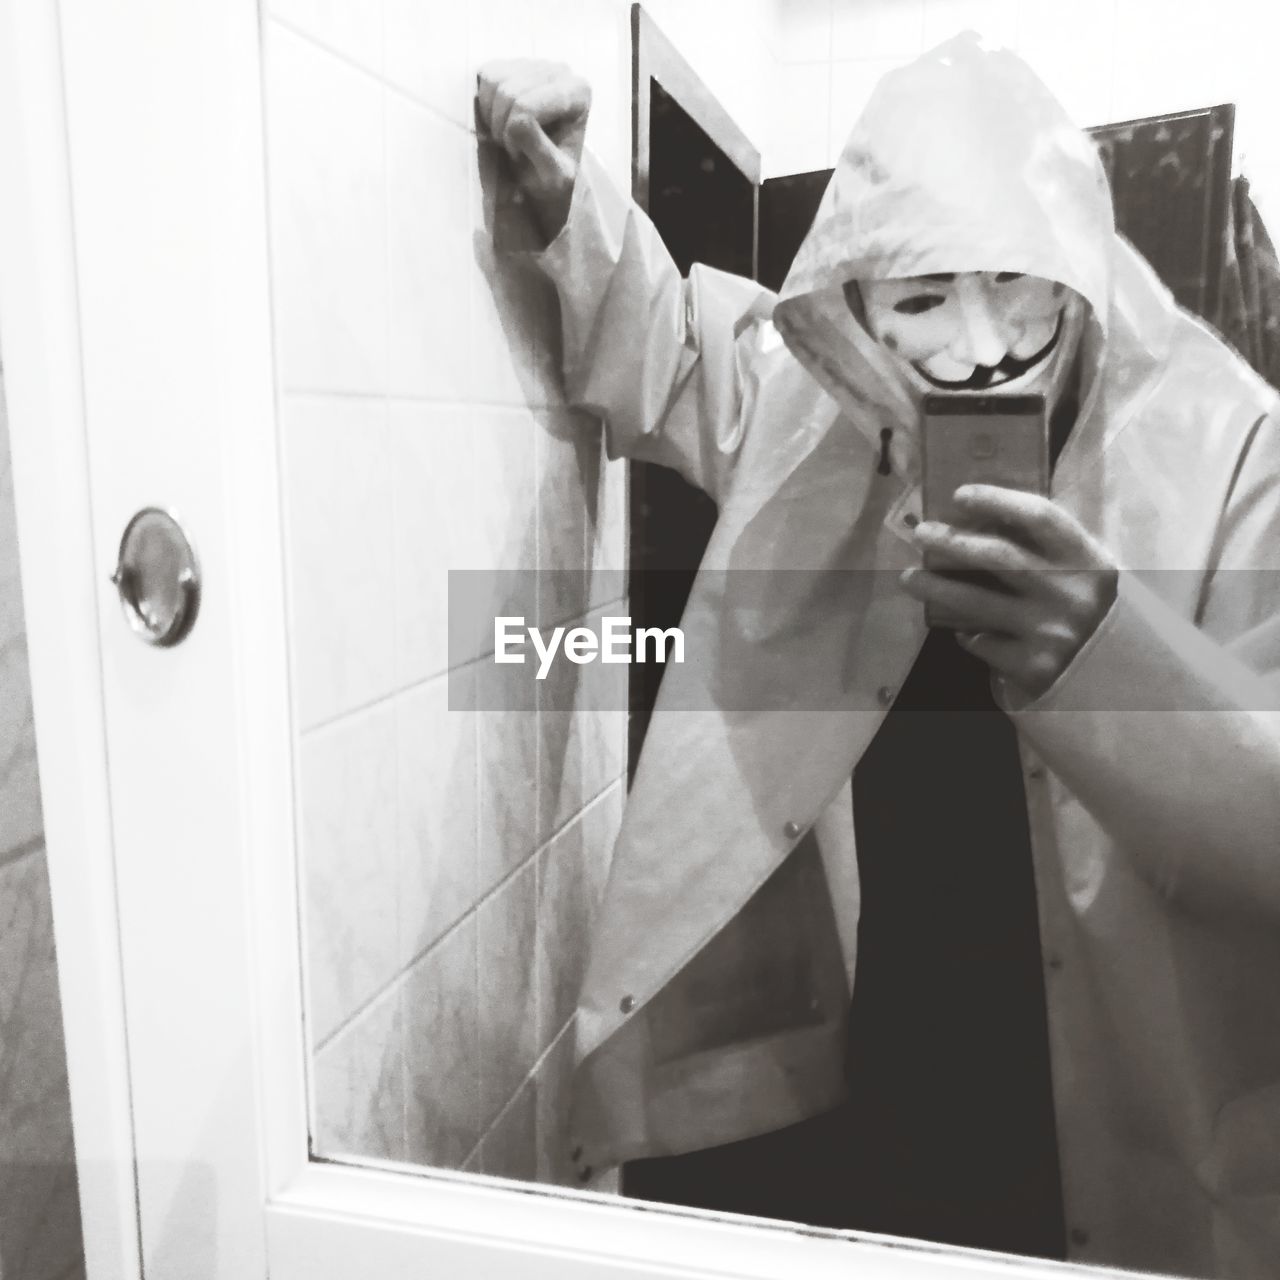 one person, adult, black and white, men, hygiene, white, protection, indoors, bathroom, reflection, mirror, occupation, security, monochrome photography, holding, monochrome, clothing, protective workwear, waist up, obscured face